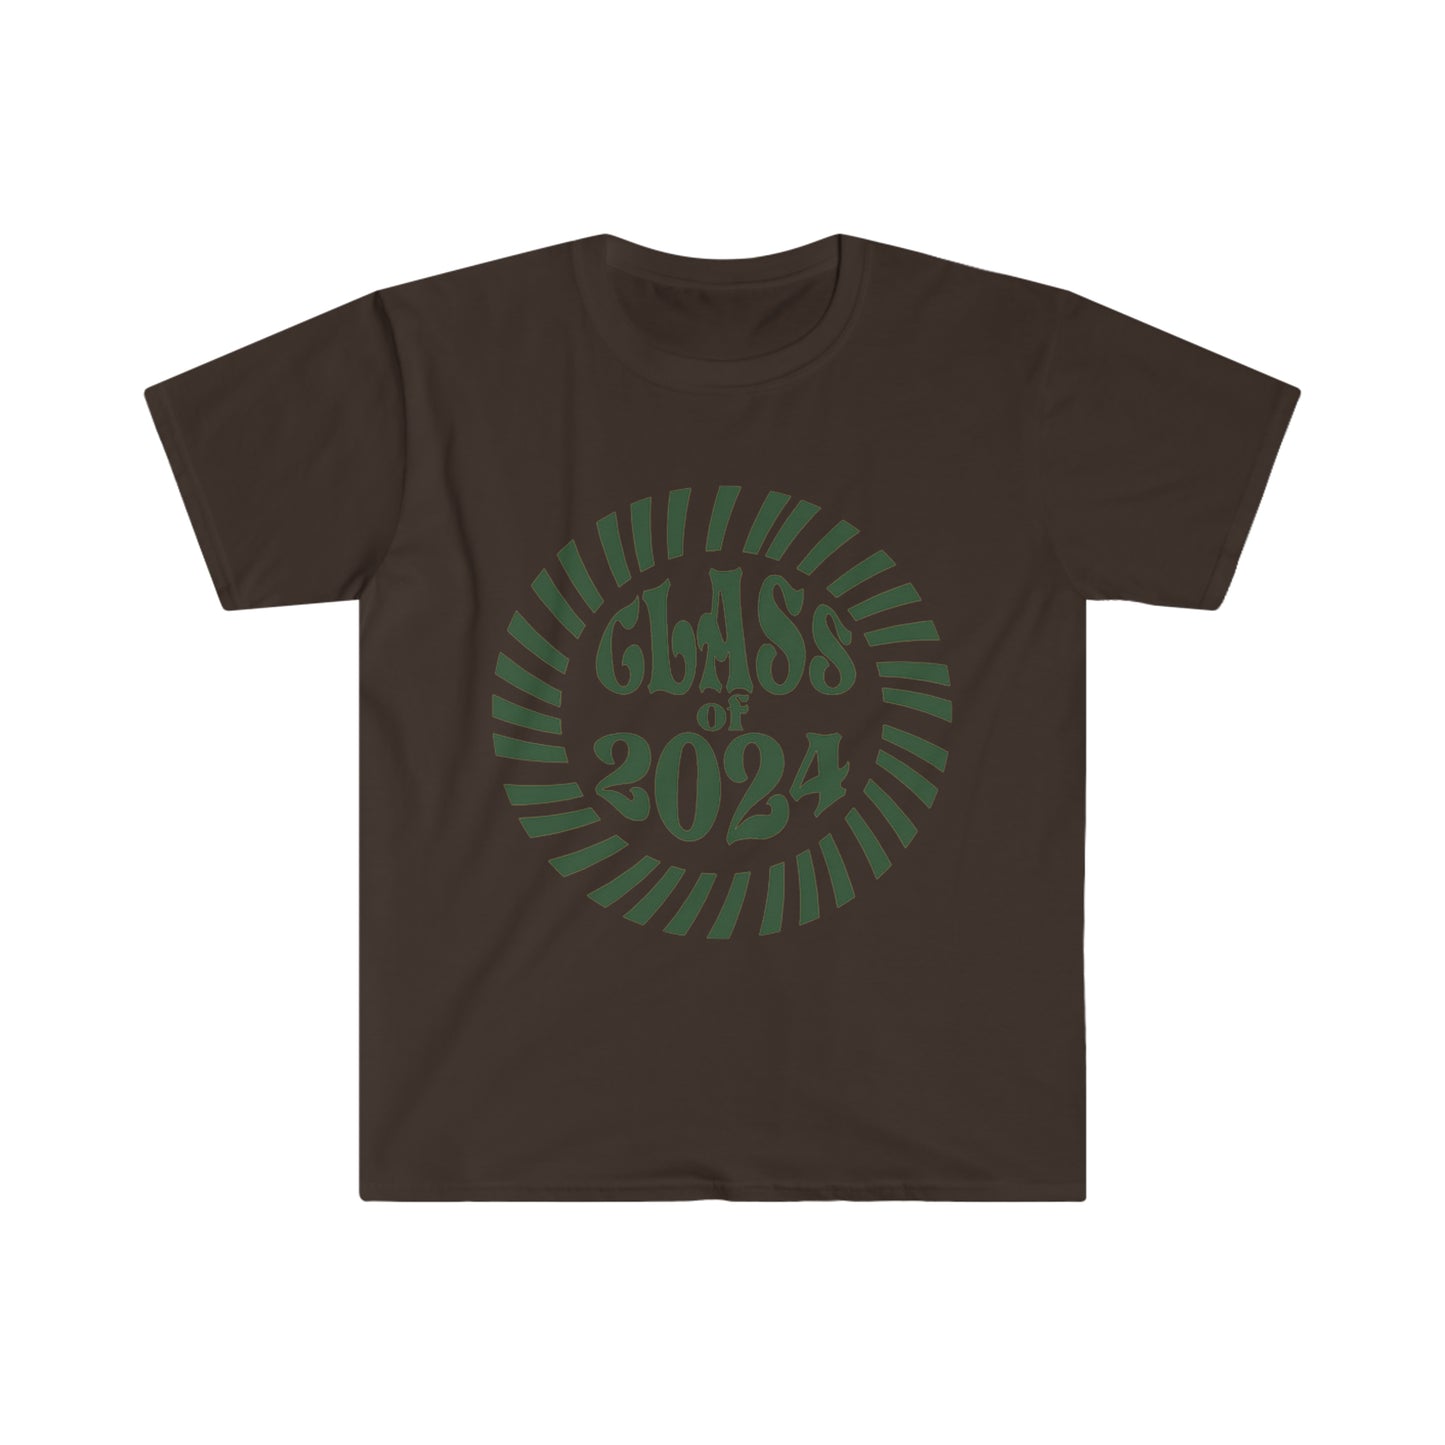 Class of 2024 - Unisex Softstyle T-Shirt